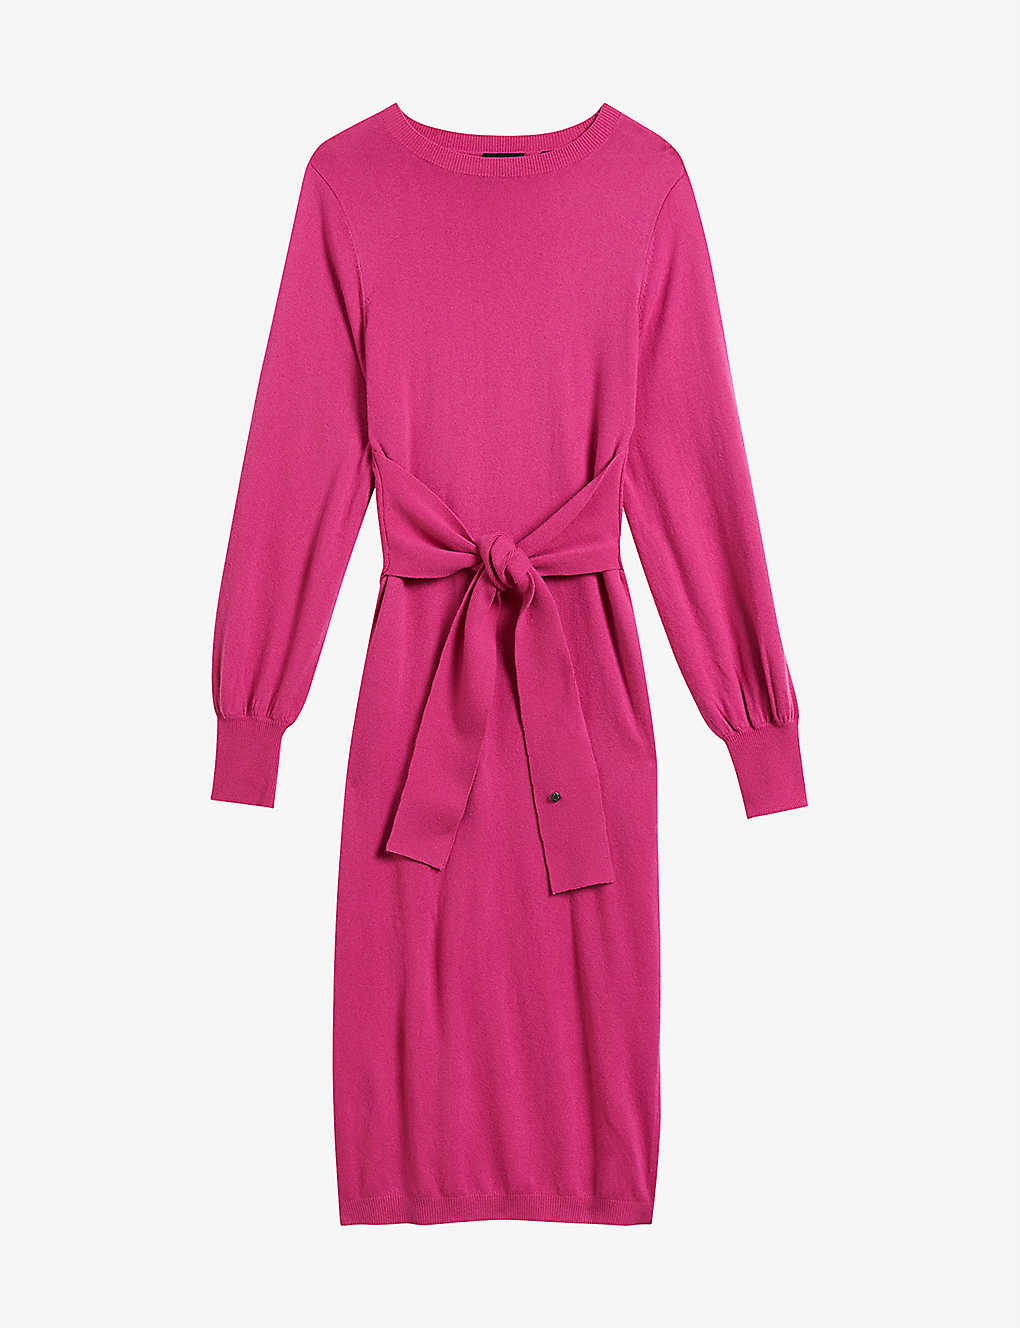 Shop Ted Baker Women's Brt-pink Essya Slouchy-fit Tie-front Knitted Midi Dress